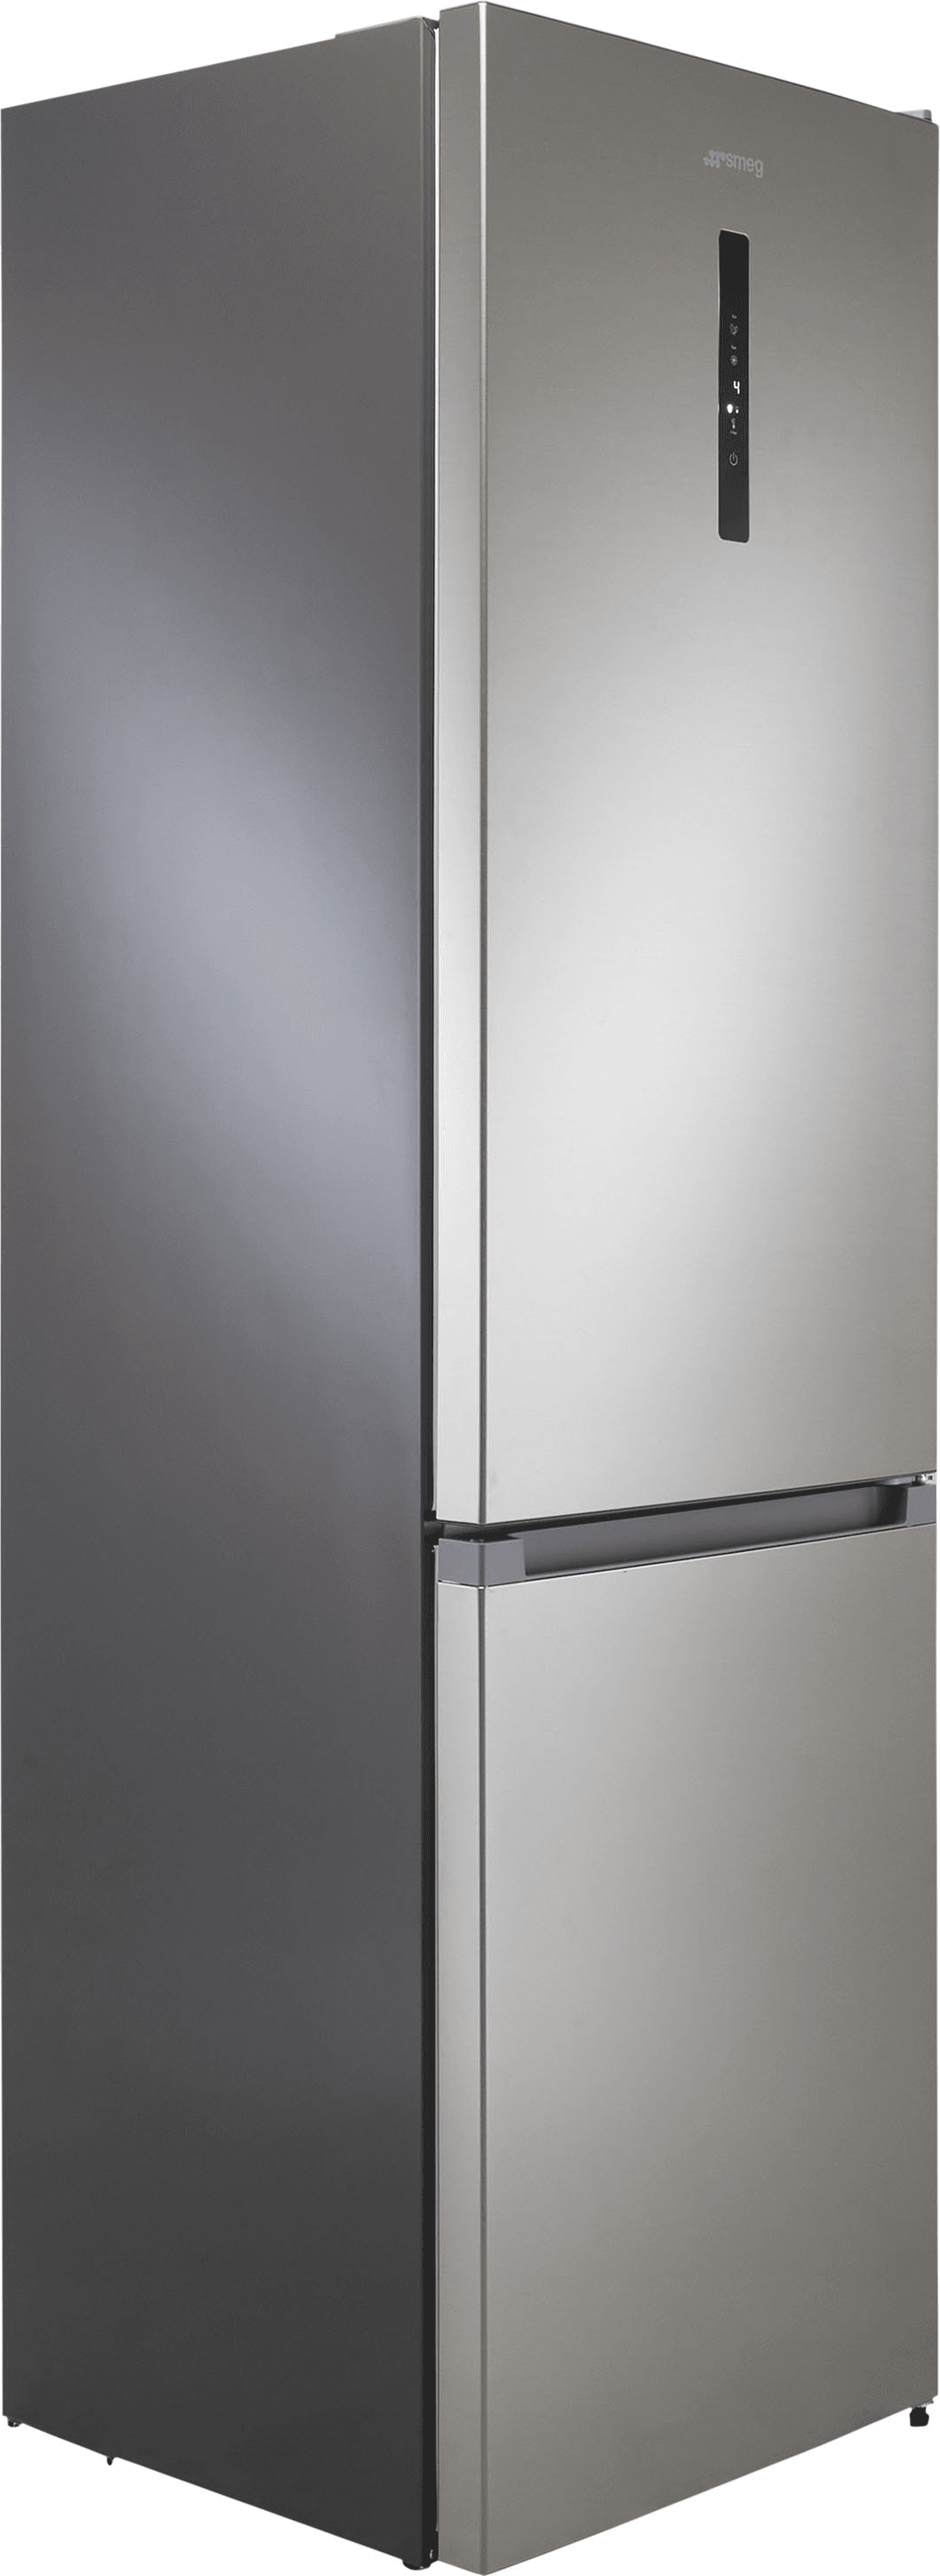 Smeg FC20XDNEUK 70/30 Frost Free Fridge Freezer - Stainless Steel Effect - E Rated, Stainless Steel